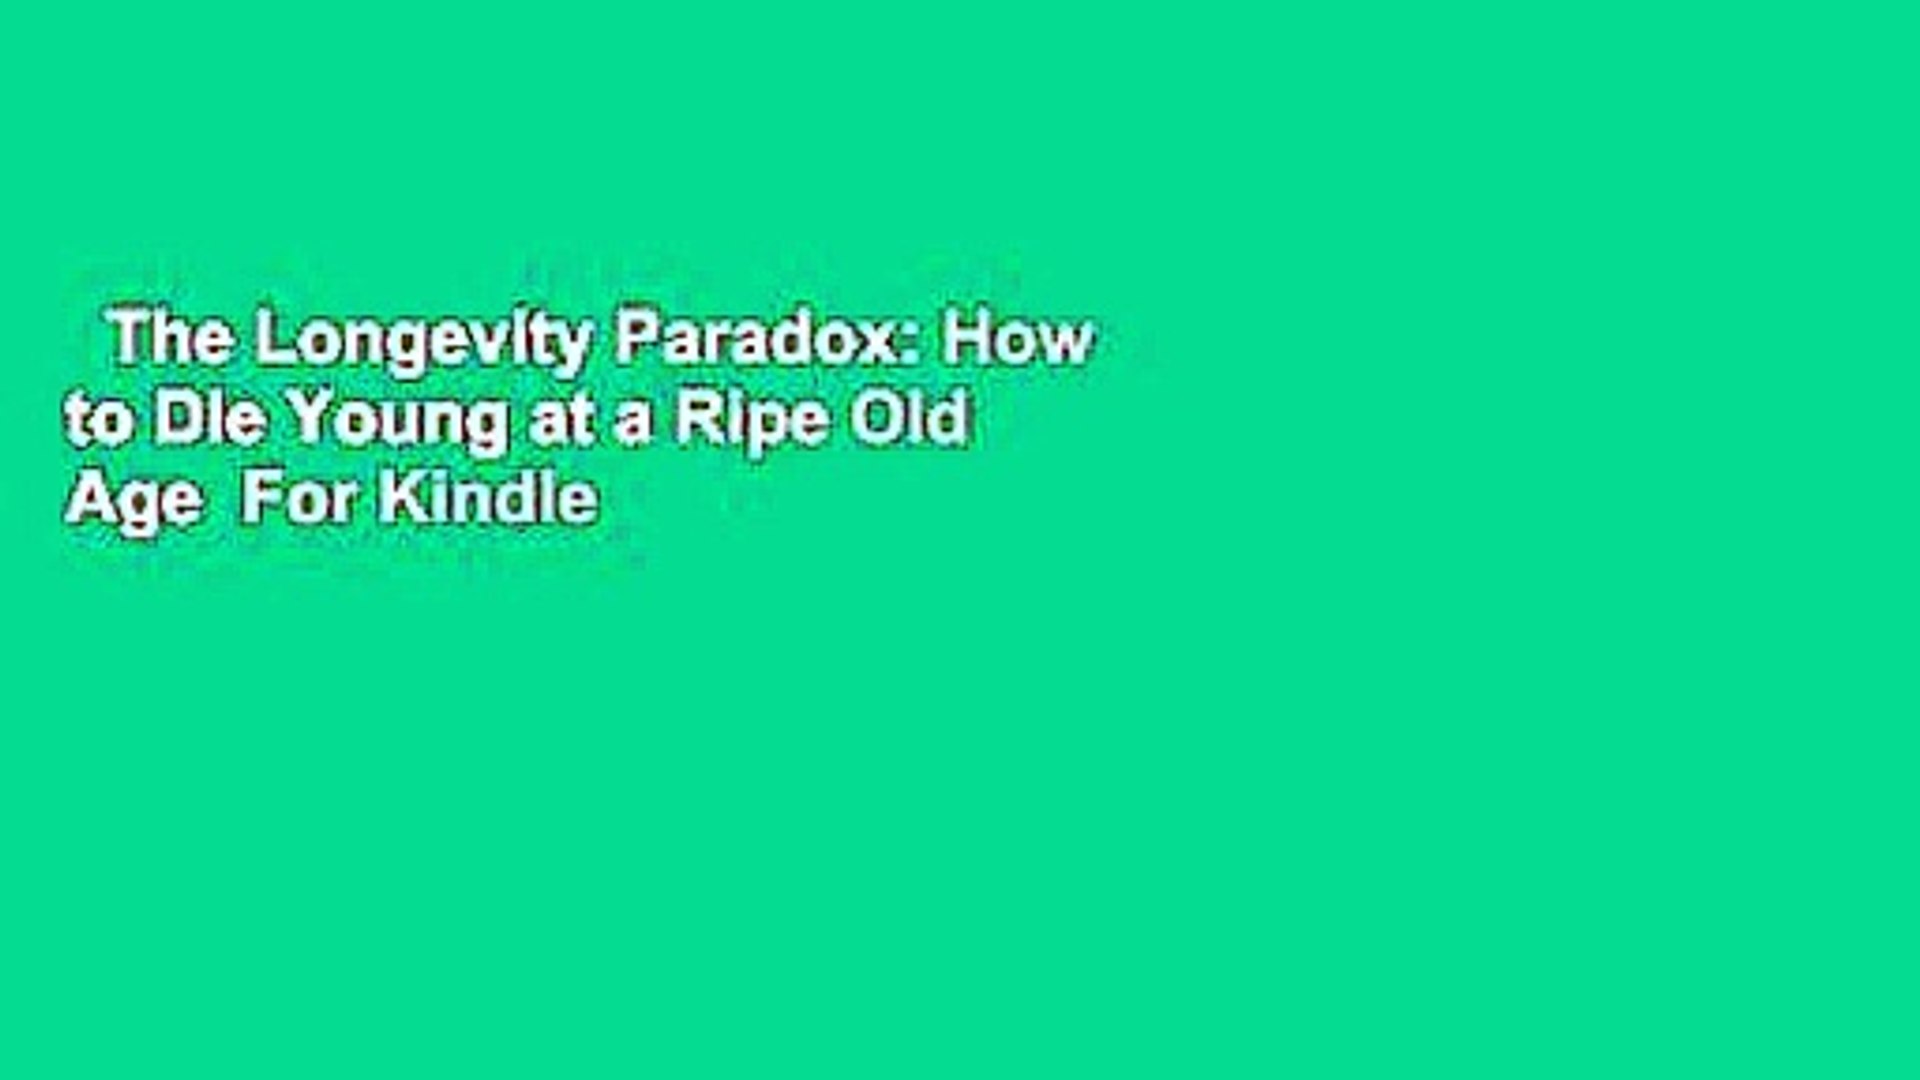 The Longevity Paradox: How to Die Young at a Ripe Old Age  For Kindle